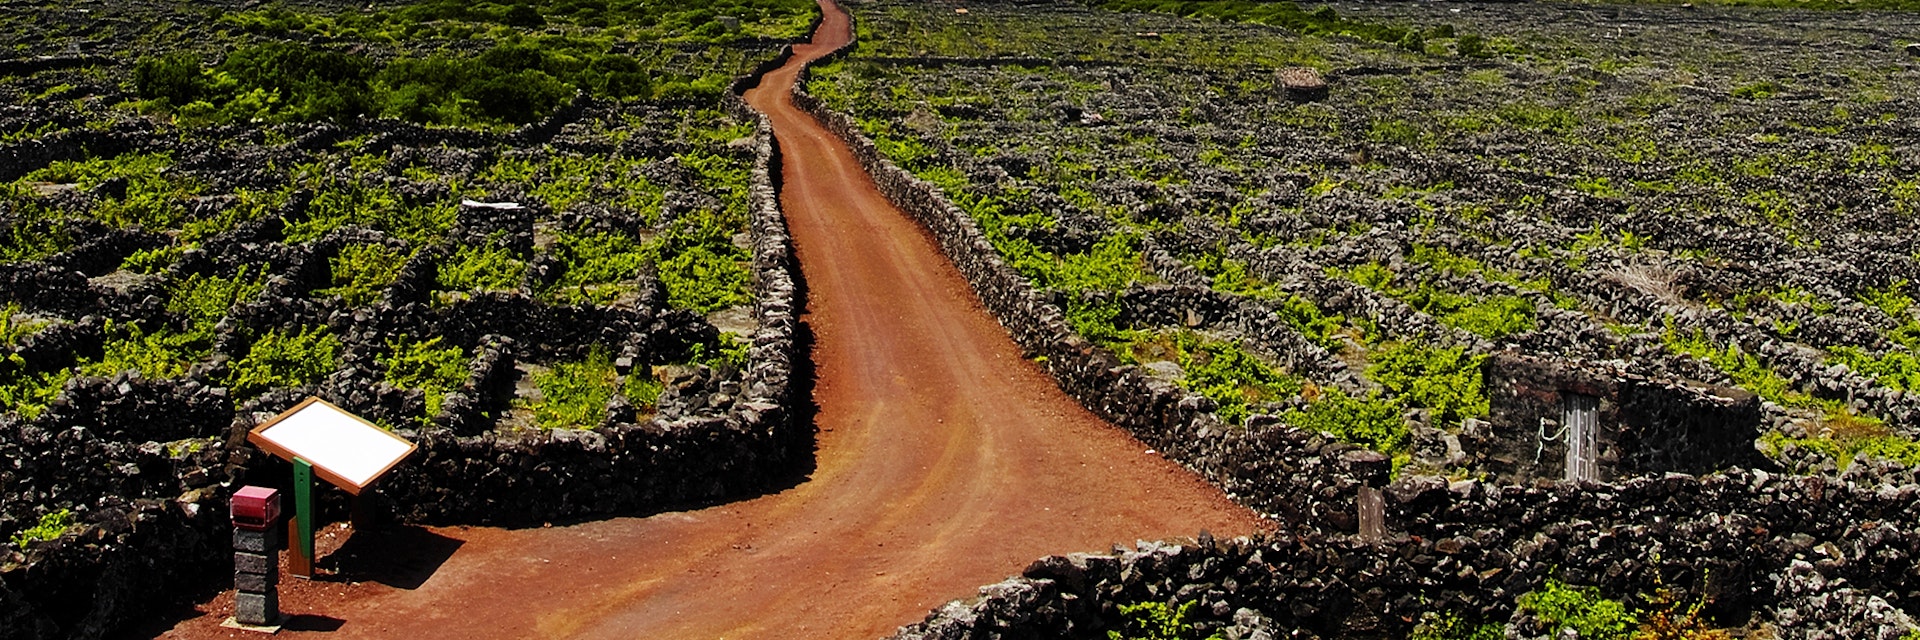 The Pico vineyards inscribed on the World Heritage List, Pico island, Azores,; Shutterstock ID 131557715; Your name (First / Last): James Kay; GL account no.: 65050; Netsuite department name: Online Editorial; Full Product or Project name including edition: Azores destination page highlights